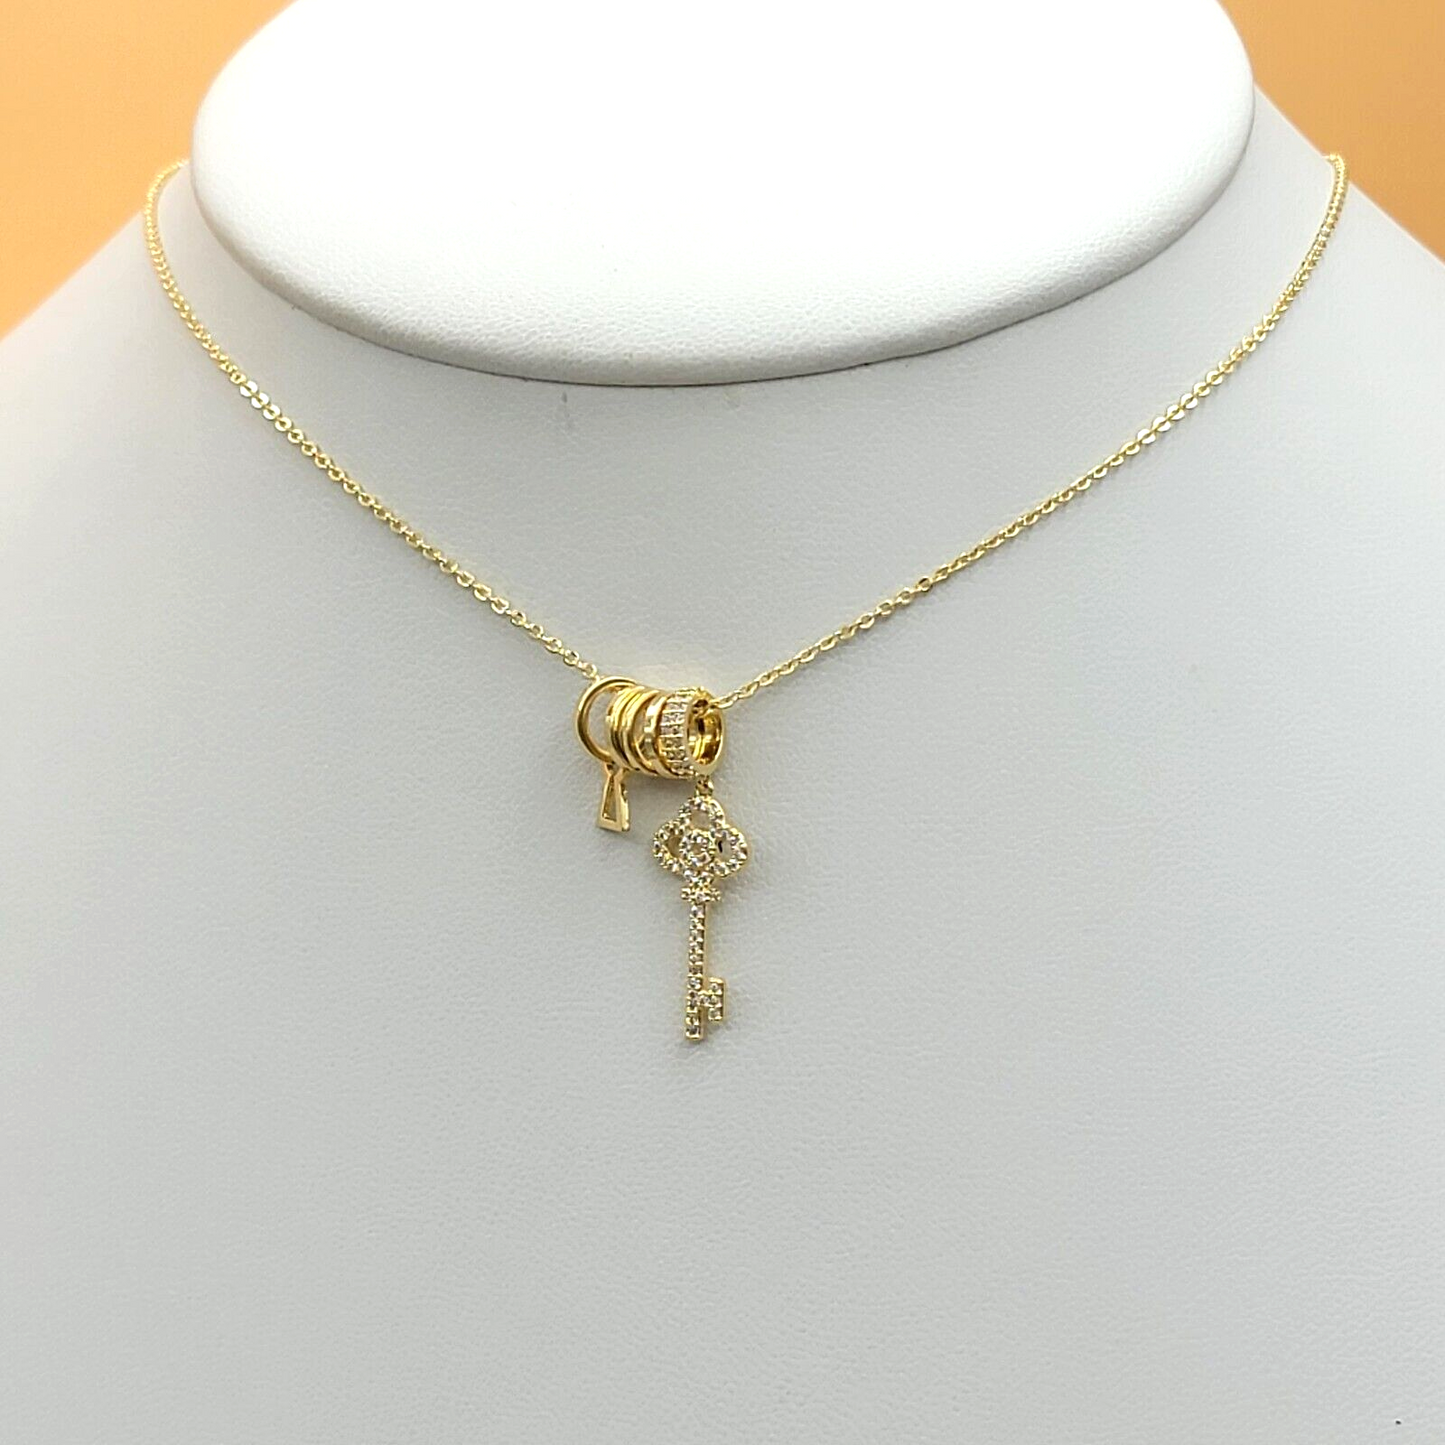 Necklaces - 14K Gold Plated. CZ Key Pendant Charms & chain. Necklace Freedom